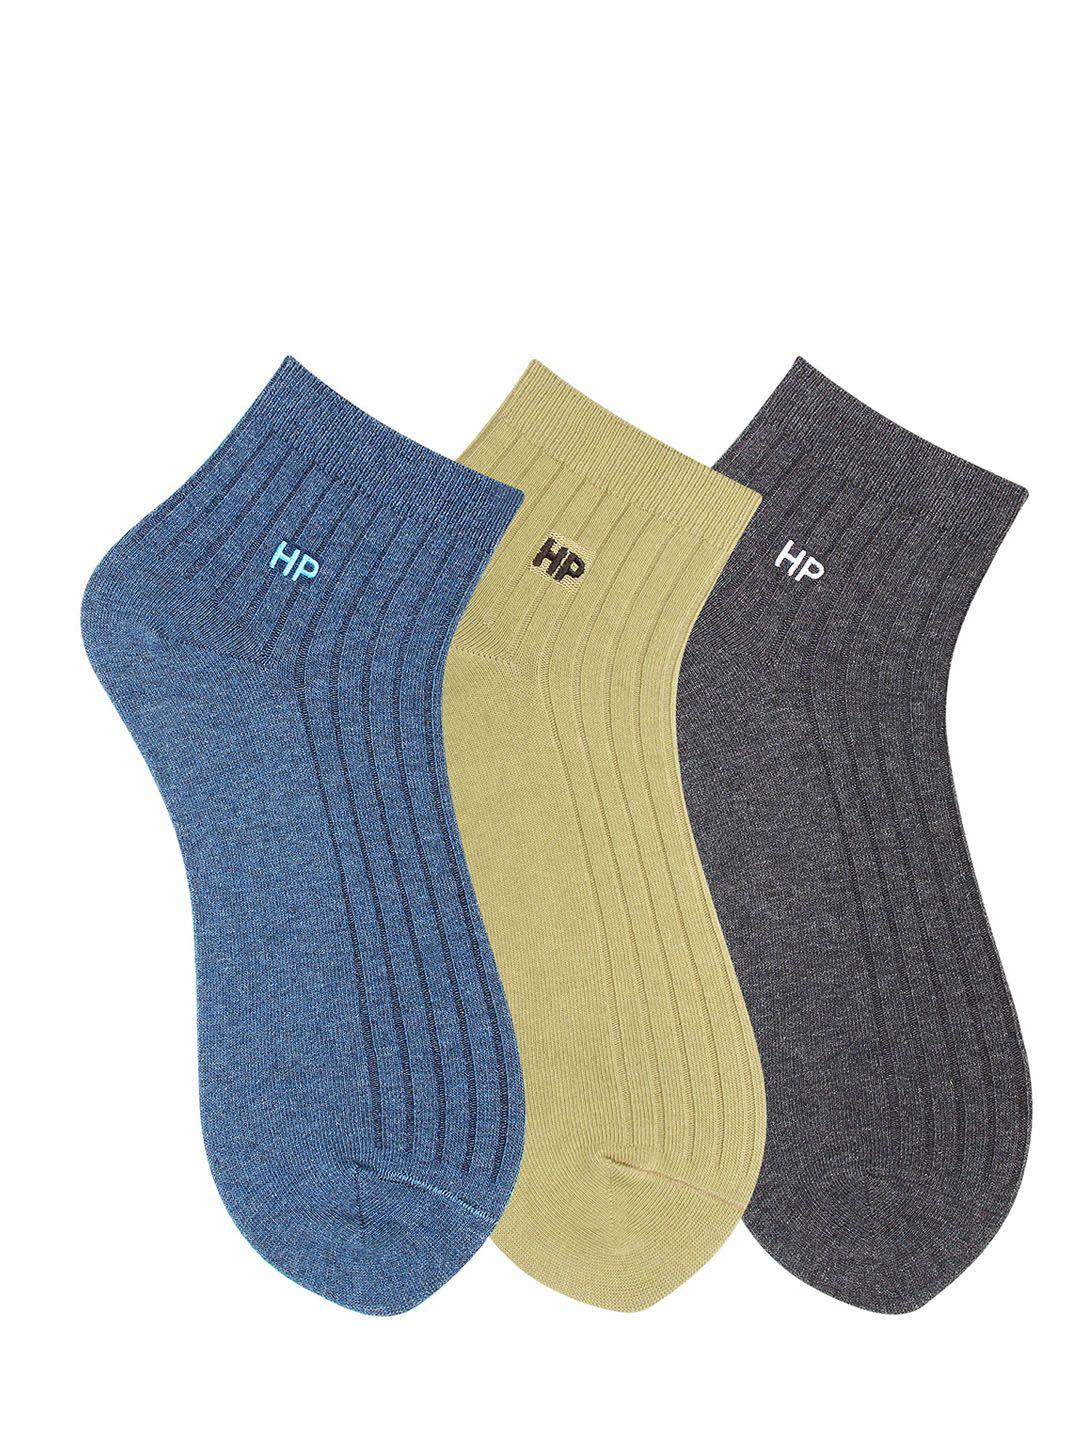 hush-puppies-men-pack-of-3-assorted-solid-ankle-length-socks